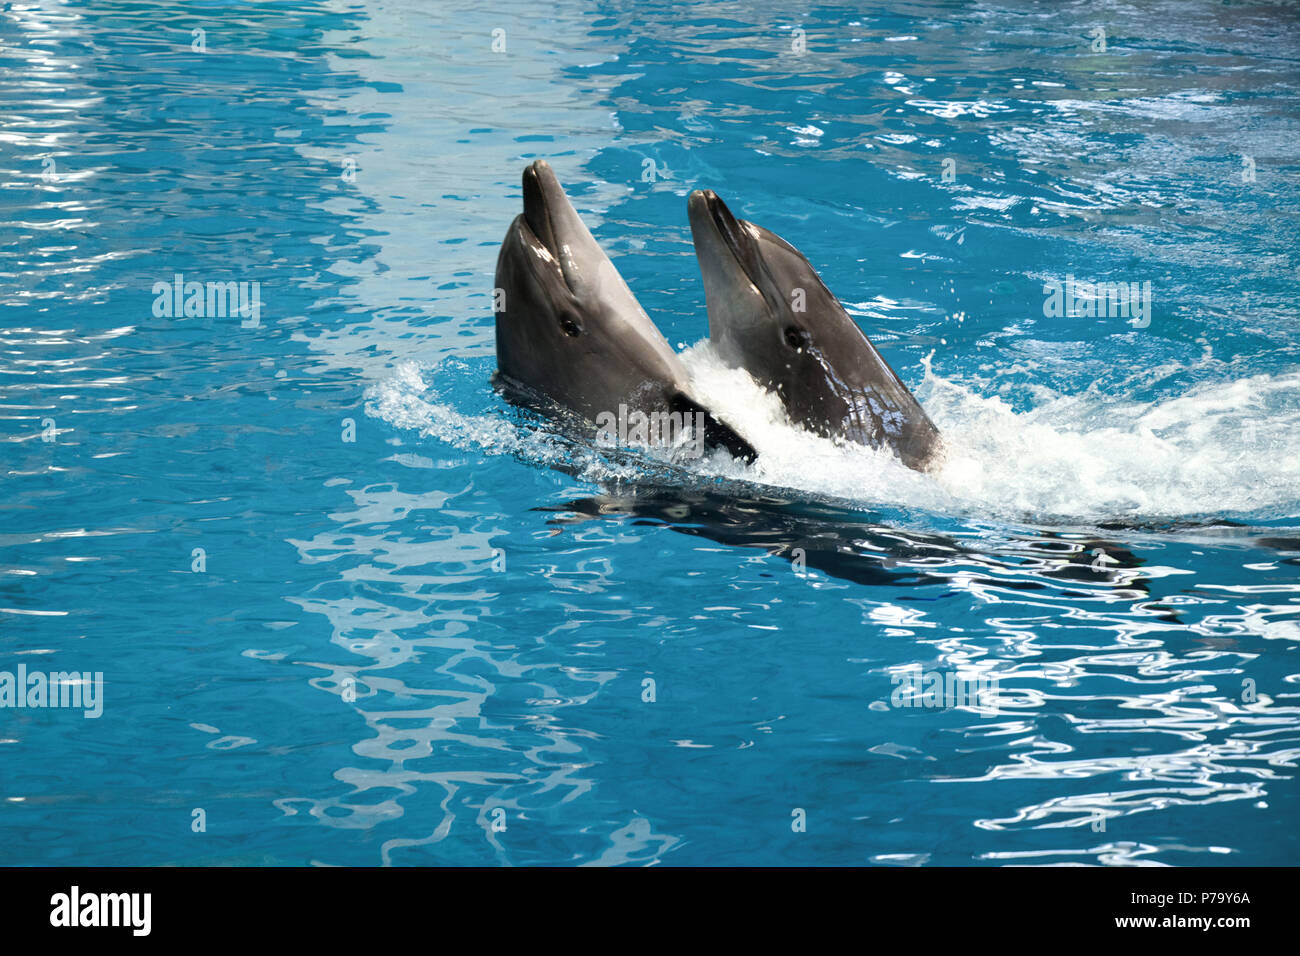 Two dophins dancing in water Stock Photo